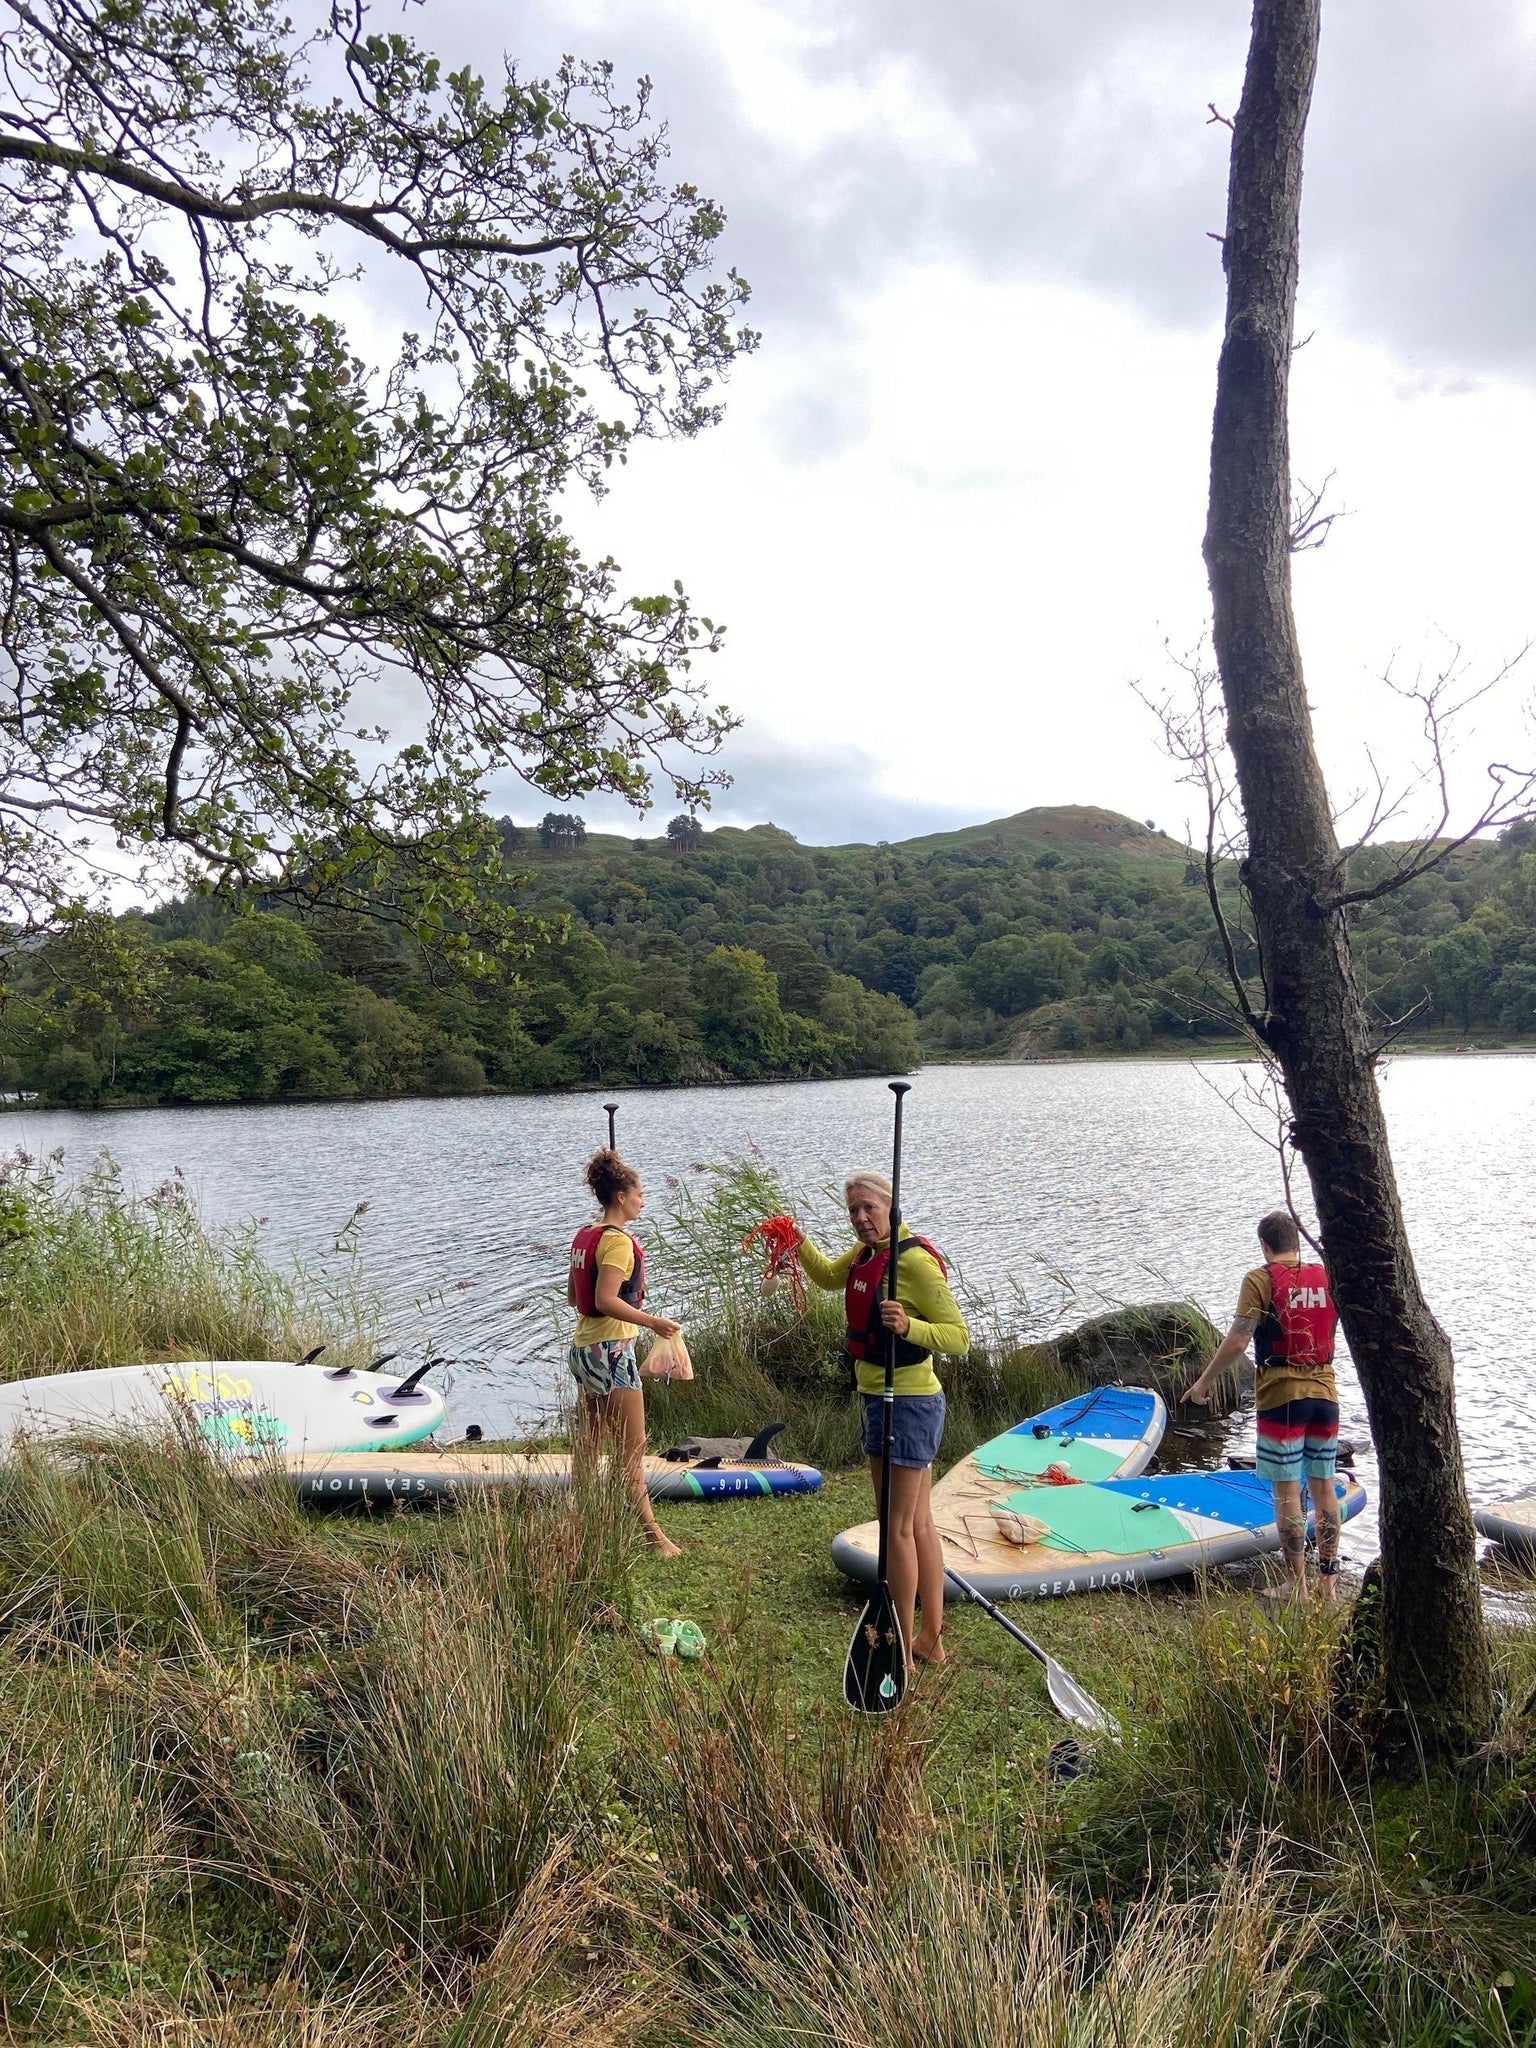 May 29-31st Yoga Retreat in the Lake District: yoga, paddle boarding, lakes & mountains